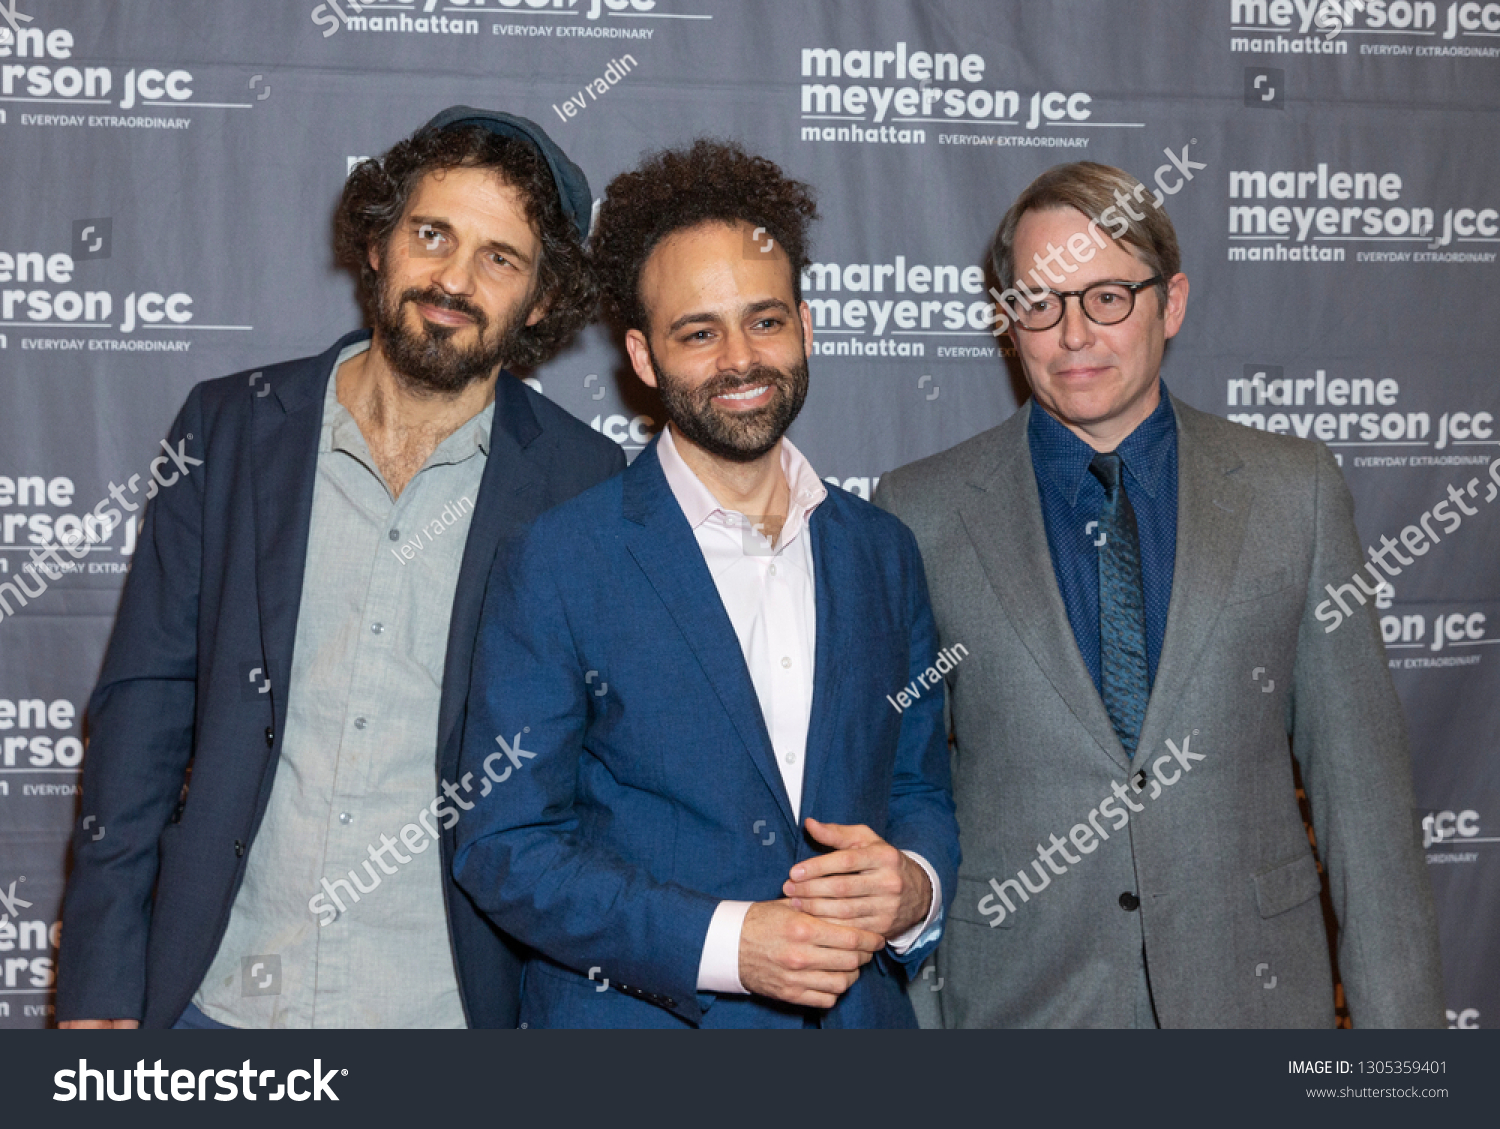 stock-photo-new-york-ny-february-actor-geza-rohrig-director-shawn-snyder-actor-matthew-broderick-1305359401.jpg